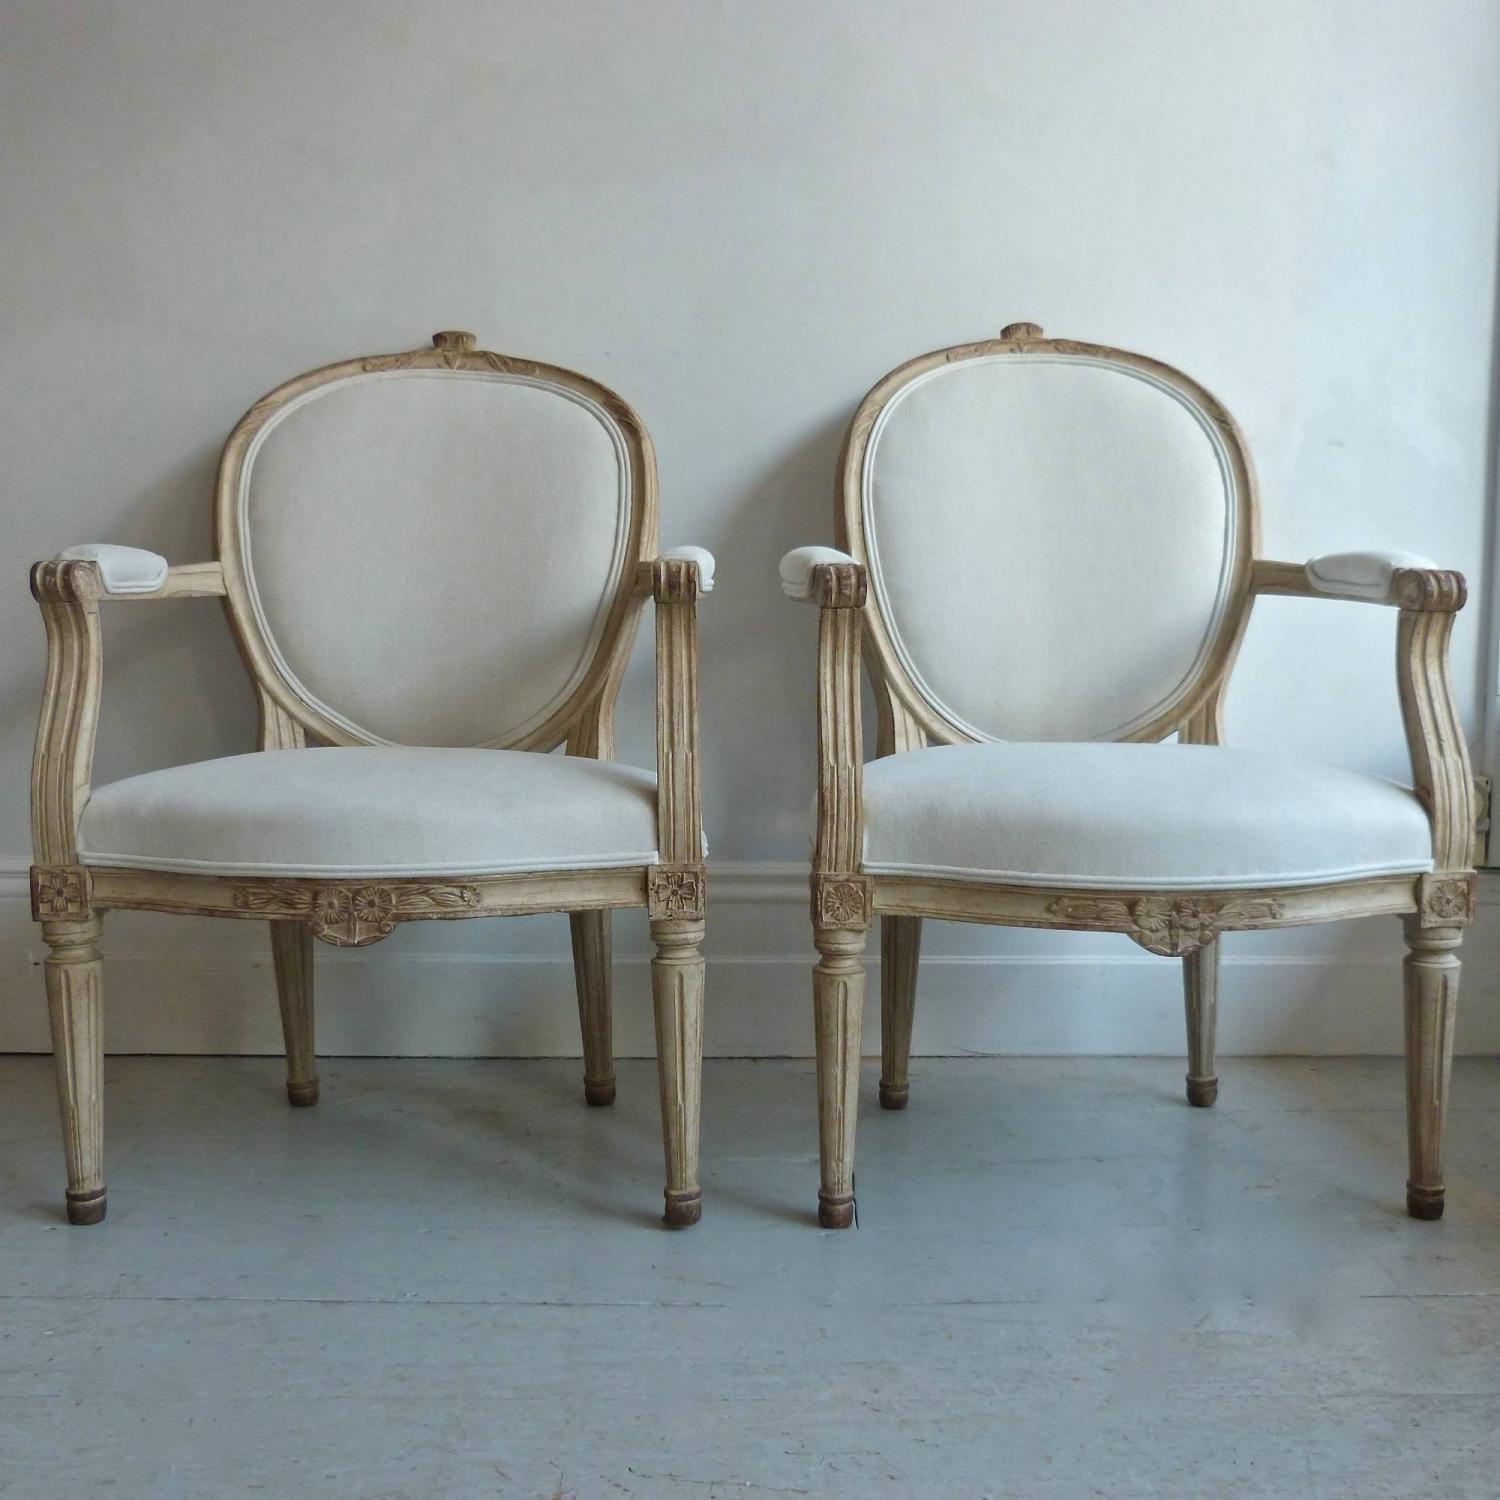 PAIR OF GUSTAVIAN STYLE ARMCHAIRS